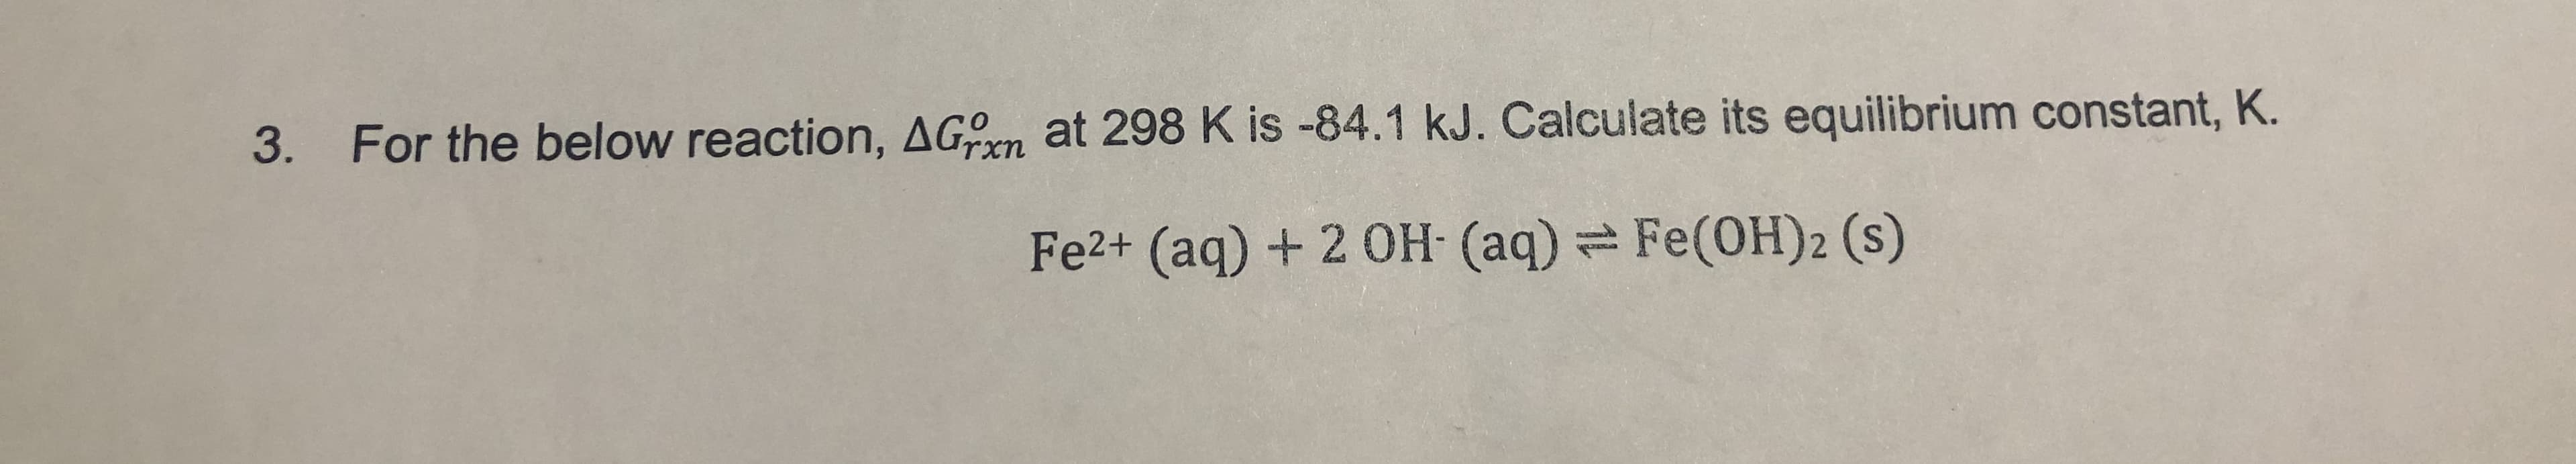 For the below reaction, AGn at 298 K is -84.1 kJ. Calculate its equilibrium constant, K.
3.
Fe2+ (aq)+ 2 0H (aq)
Fe(OH) 2 (s)
